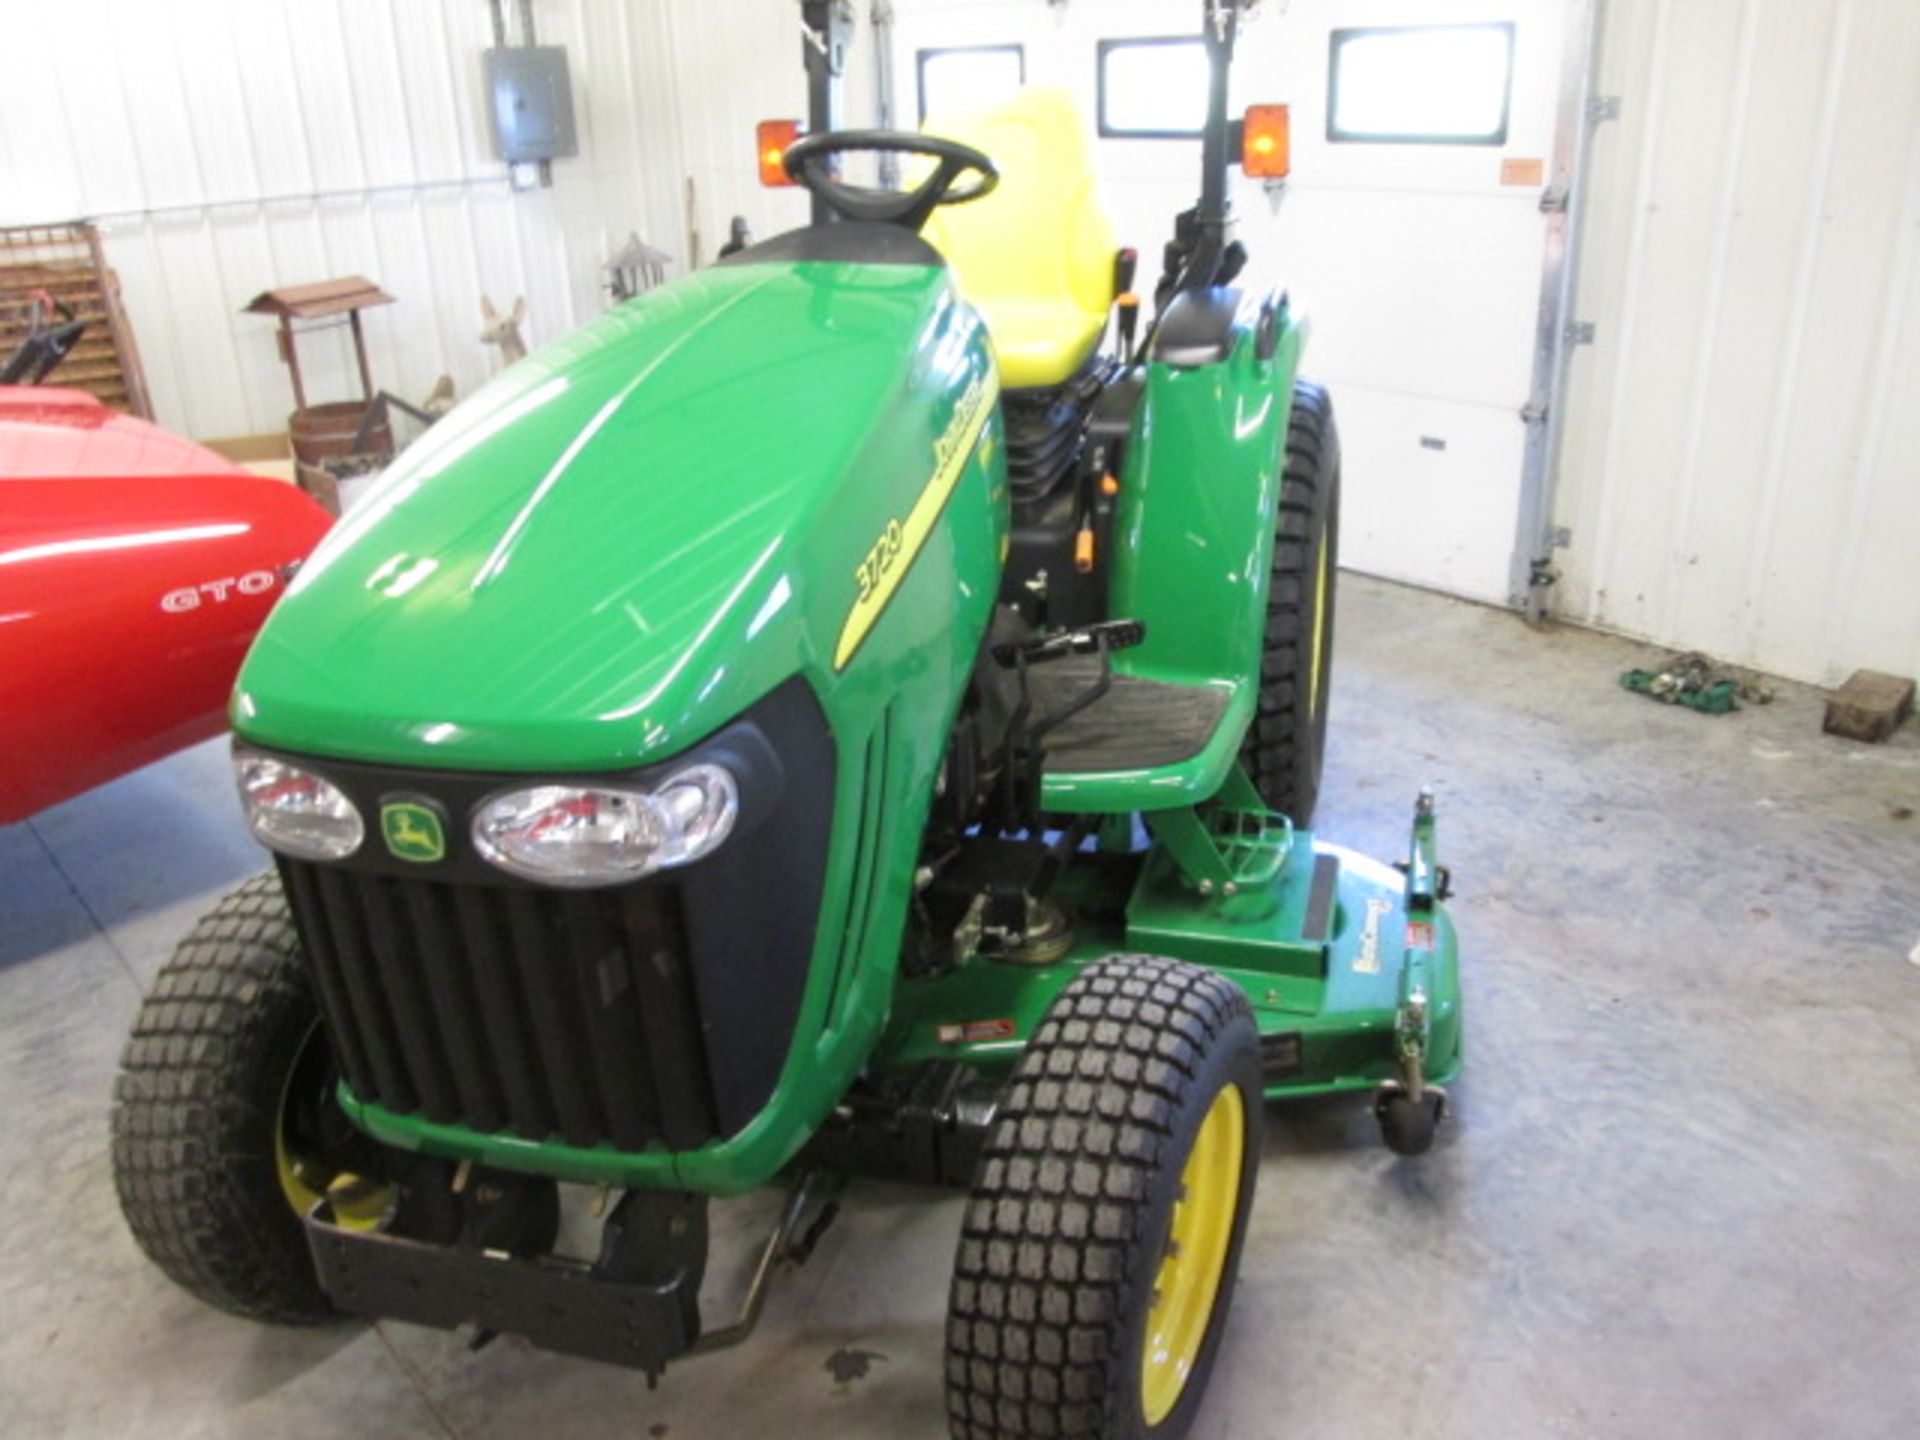 2011 JD 3720 MFWD COMPACT TRACTOR, 72” DECK;HYDRO; 40 HRS;LIKE NEW